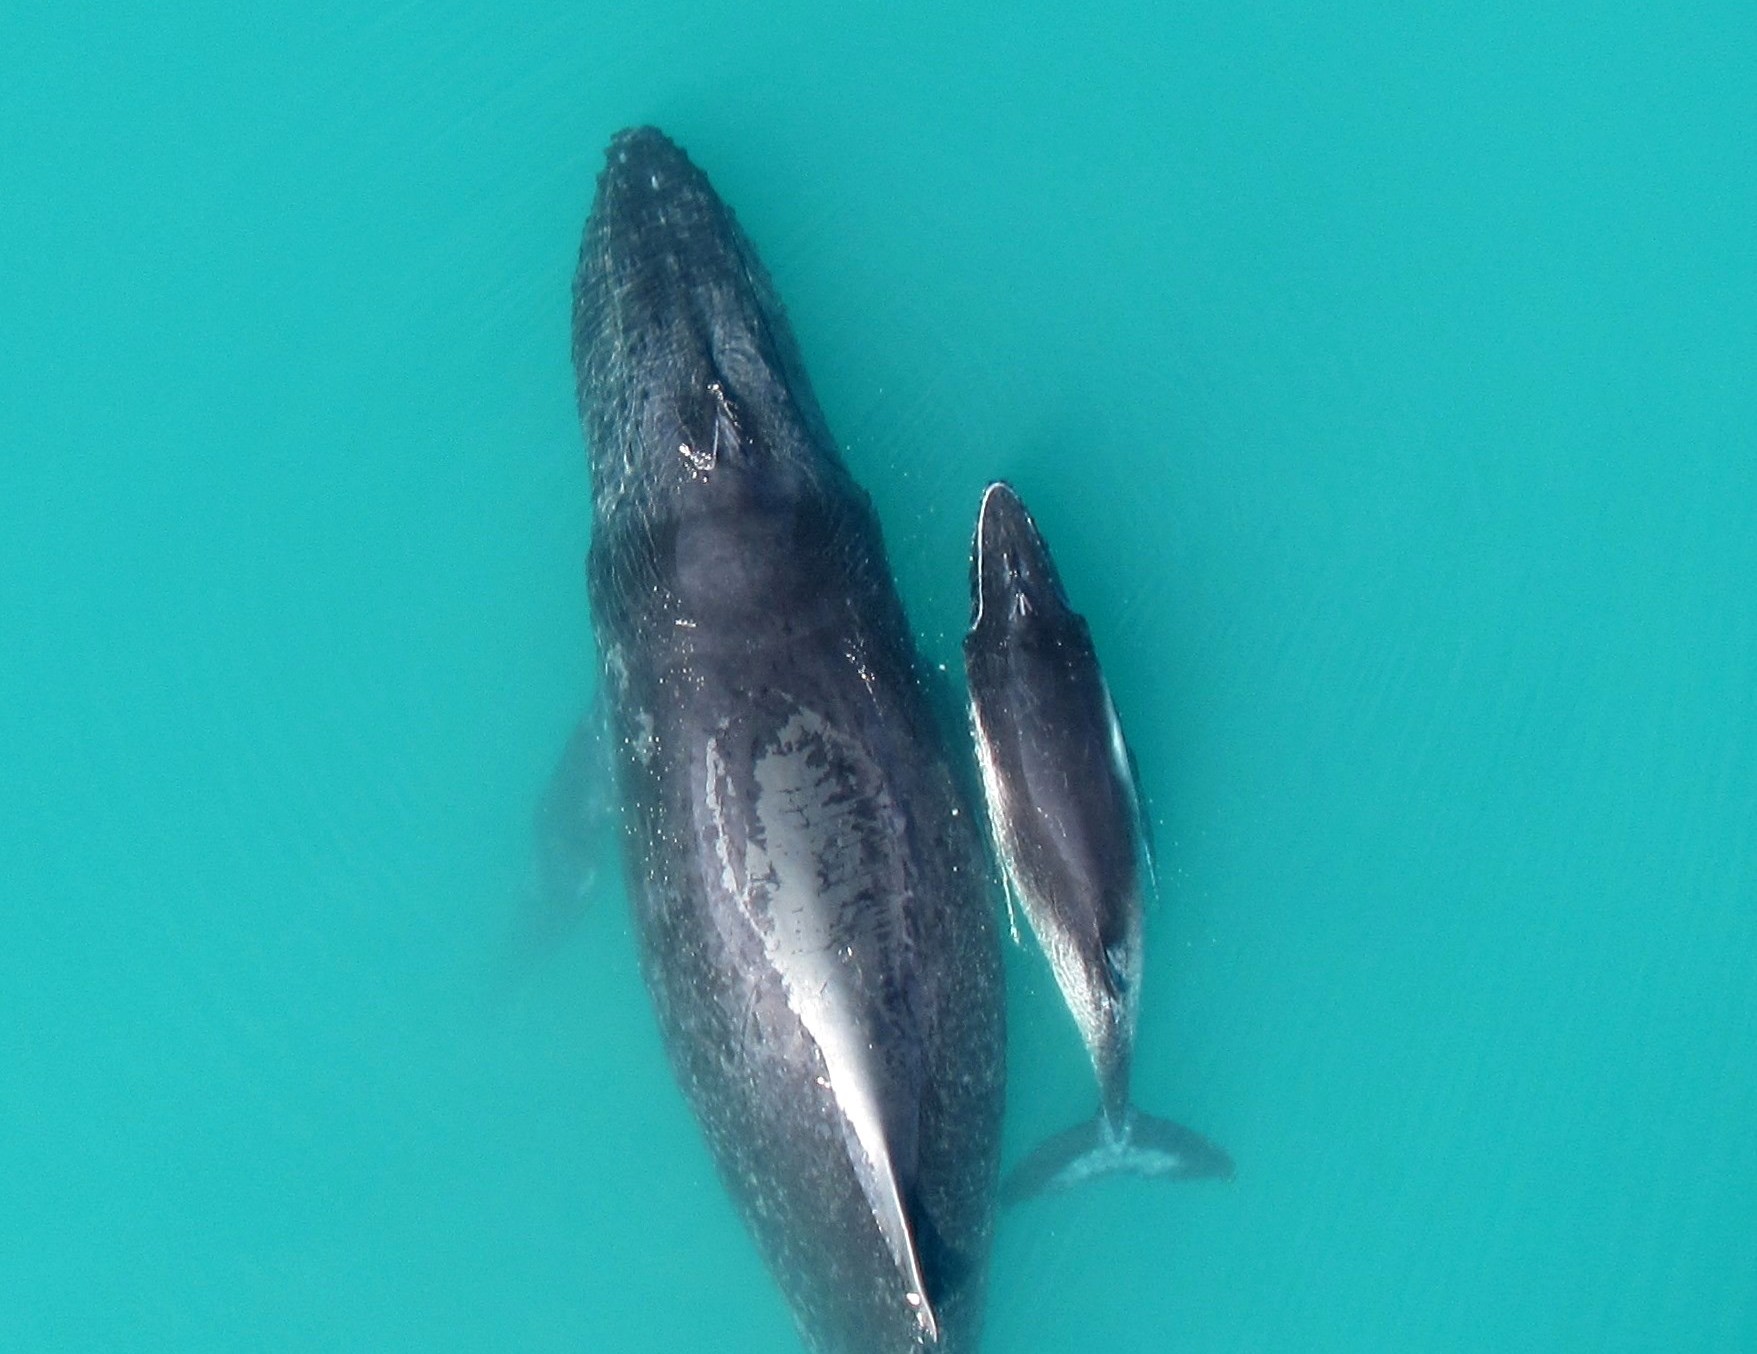 A mother-calf humpback whale pair in Exmouth Gulf. Credit: Fredrik Christiansen